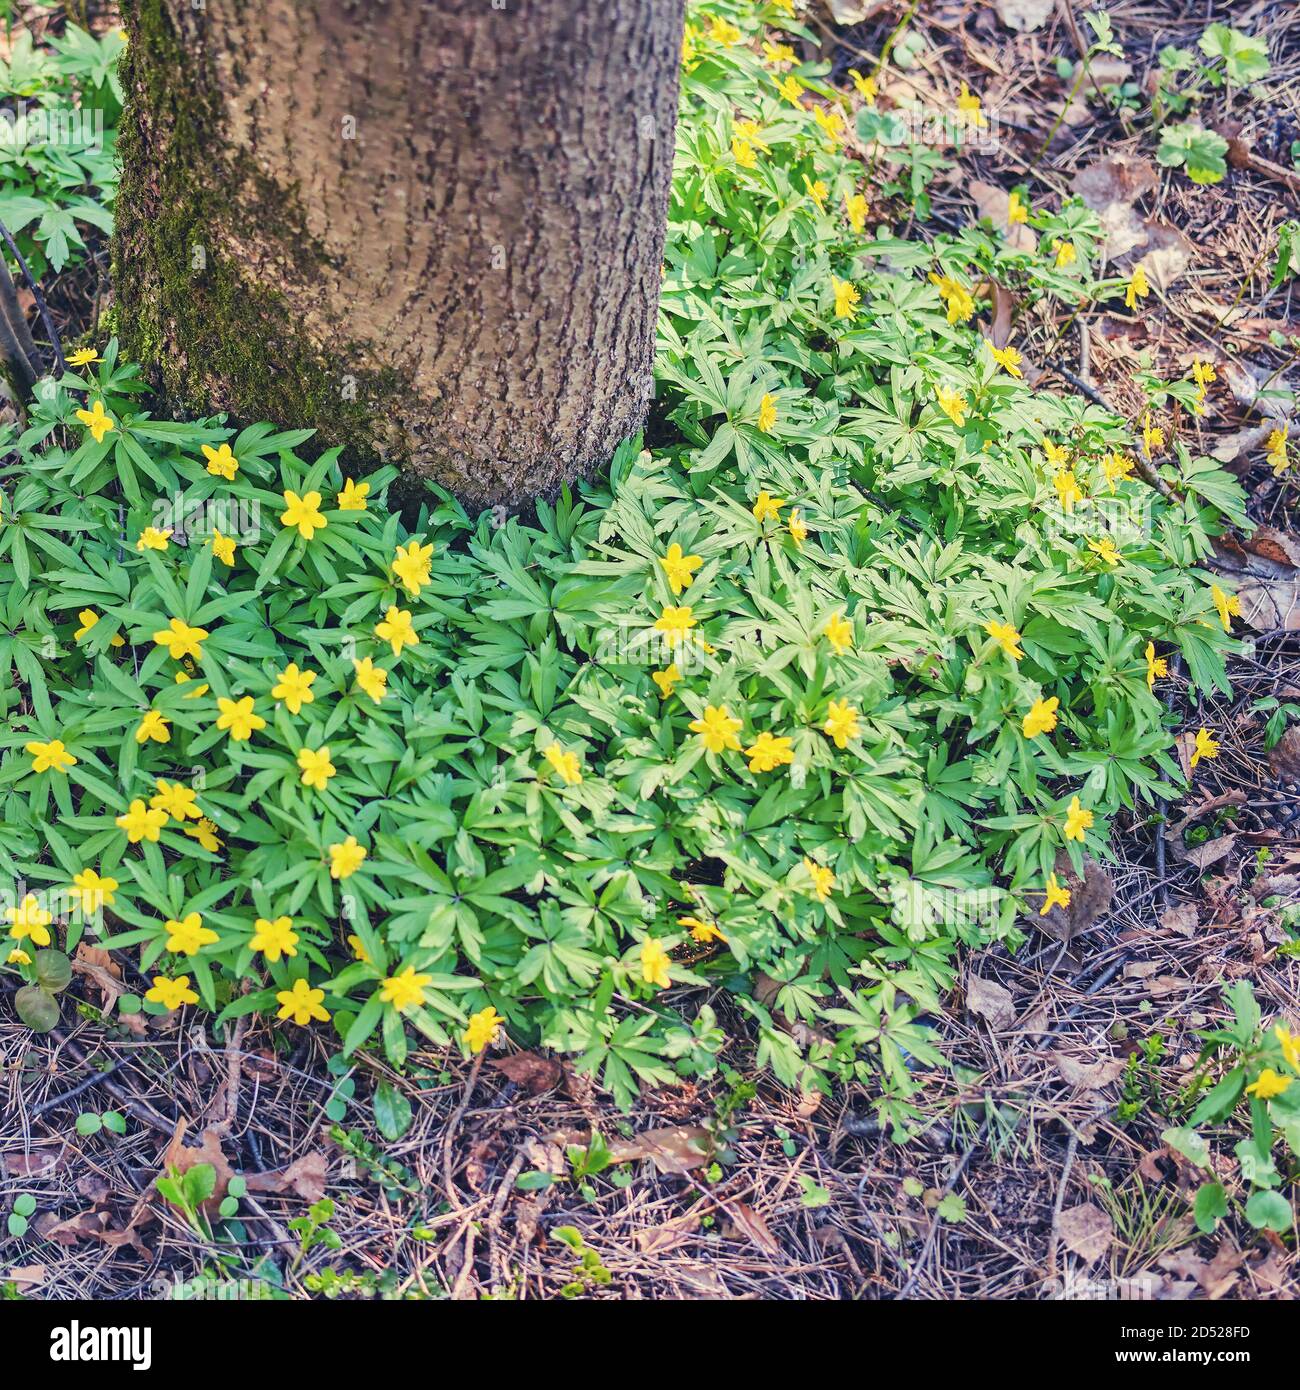 Anemone ranunculoides is a plant in the Buttercup family, a species of the genus anemone. Small yellow flowers grow around a tree in the forest. Stock Photo